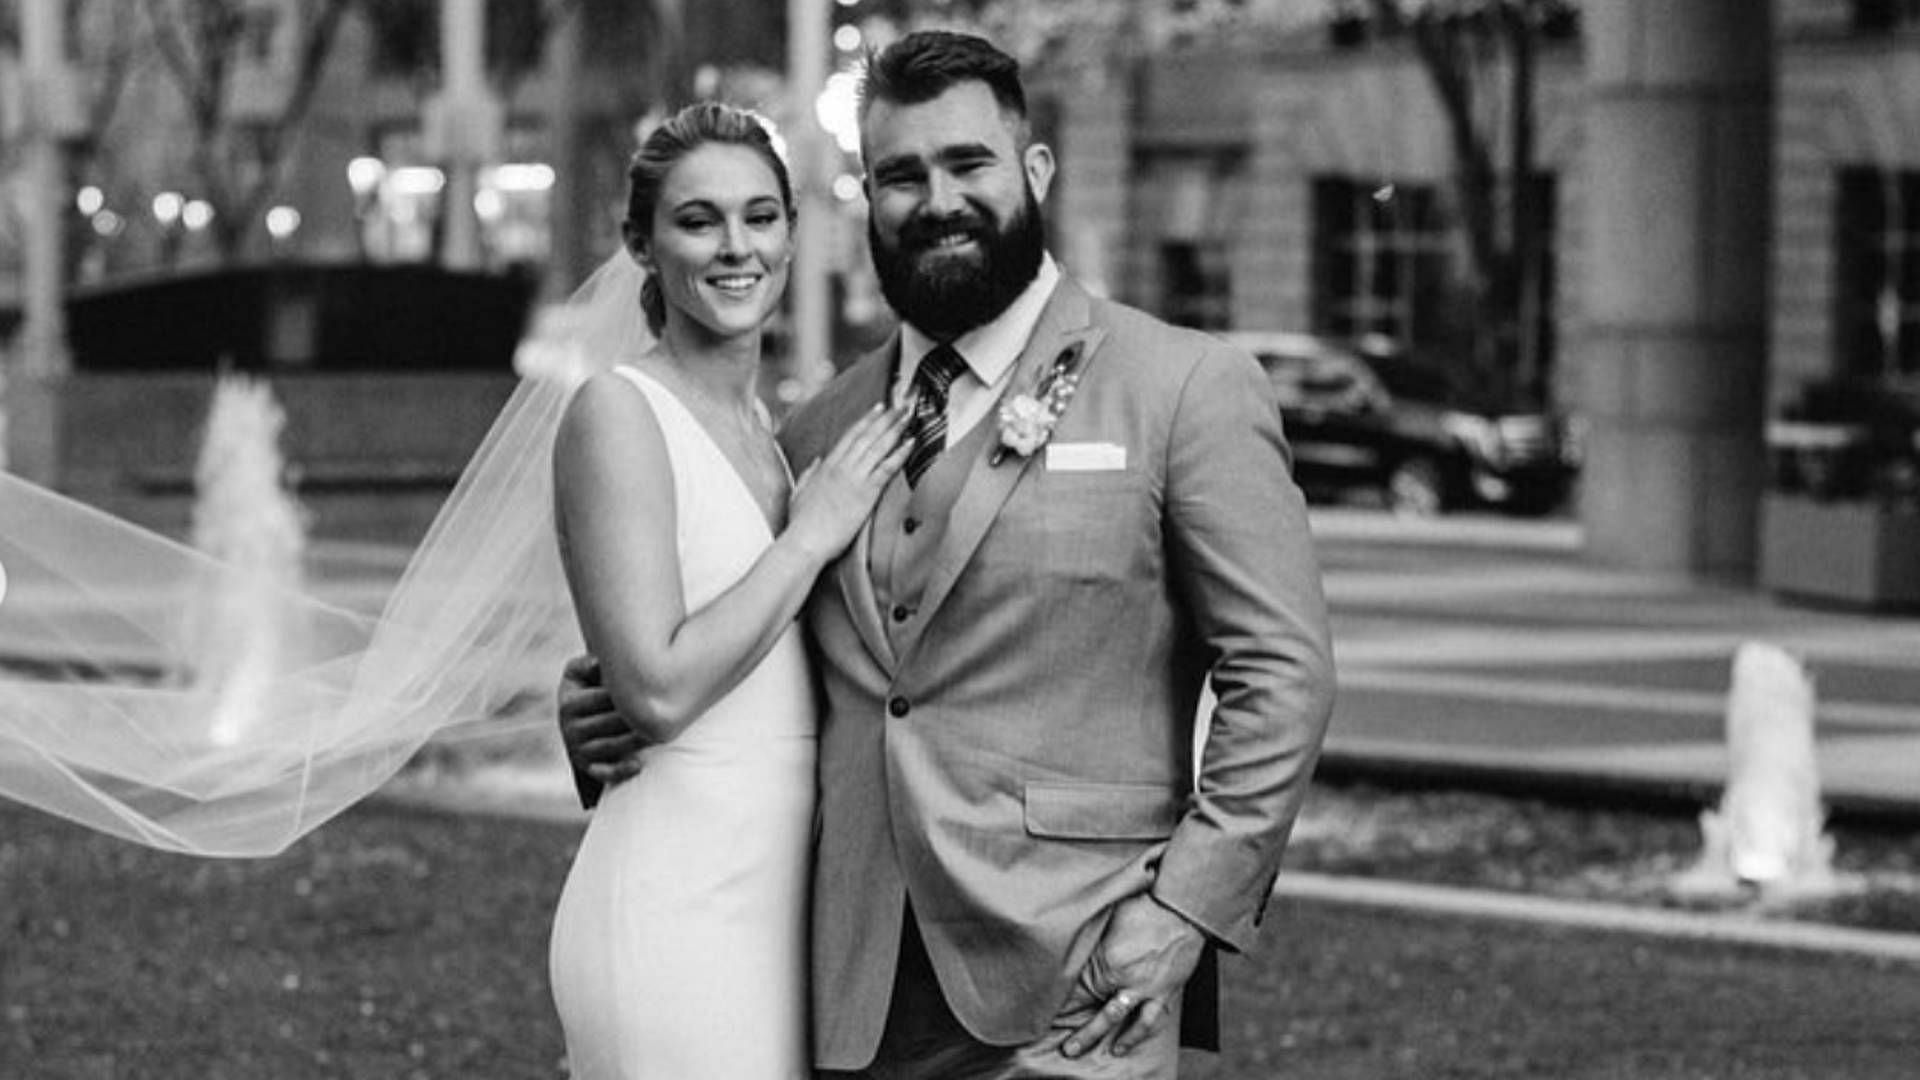 PHOTOS: Jason Kelce Got Married in Philly This Weekend